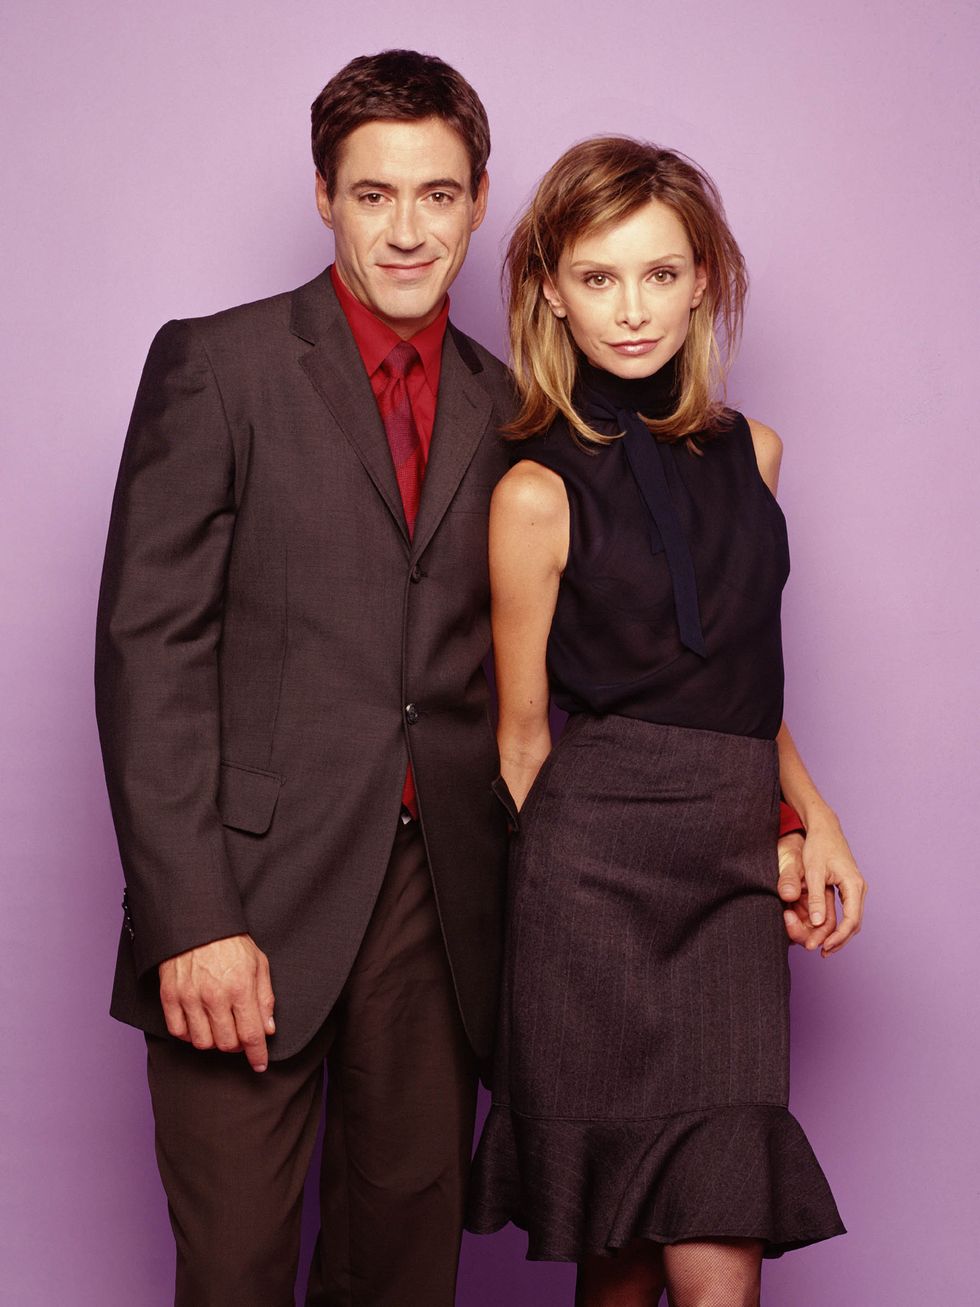 Robert Downey Jr. and Calista Flockhart in 'Ally McBeal'